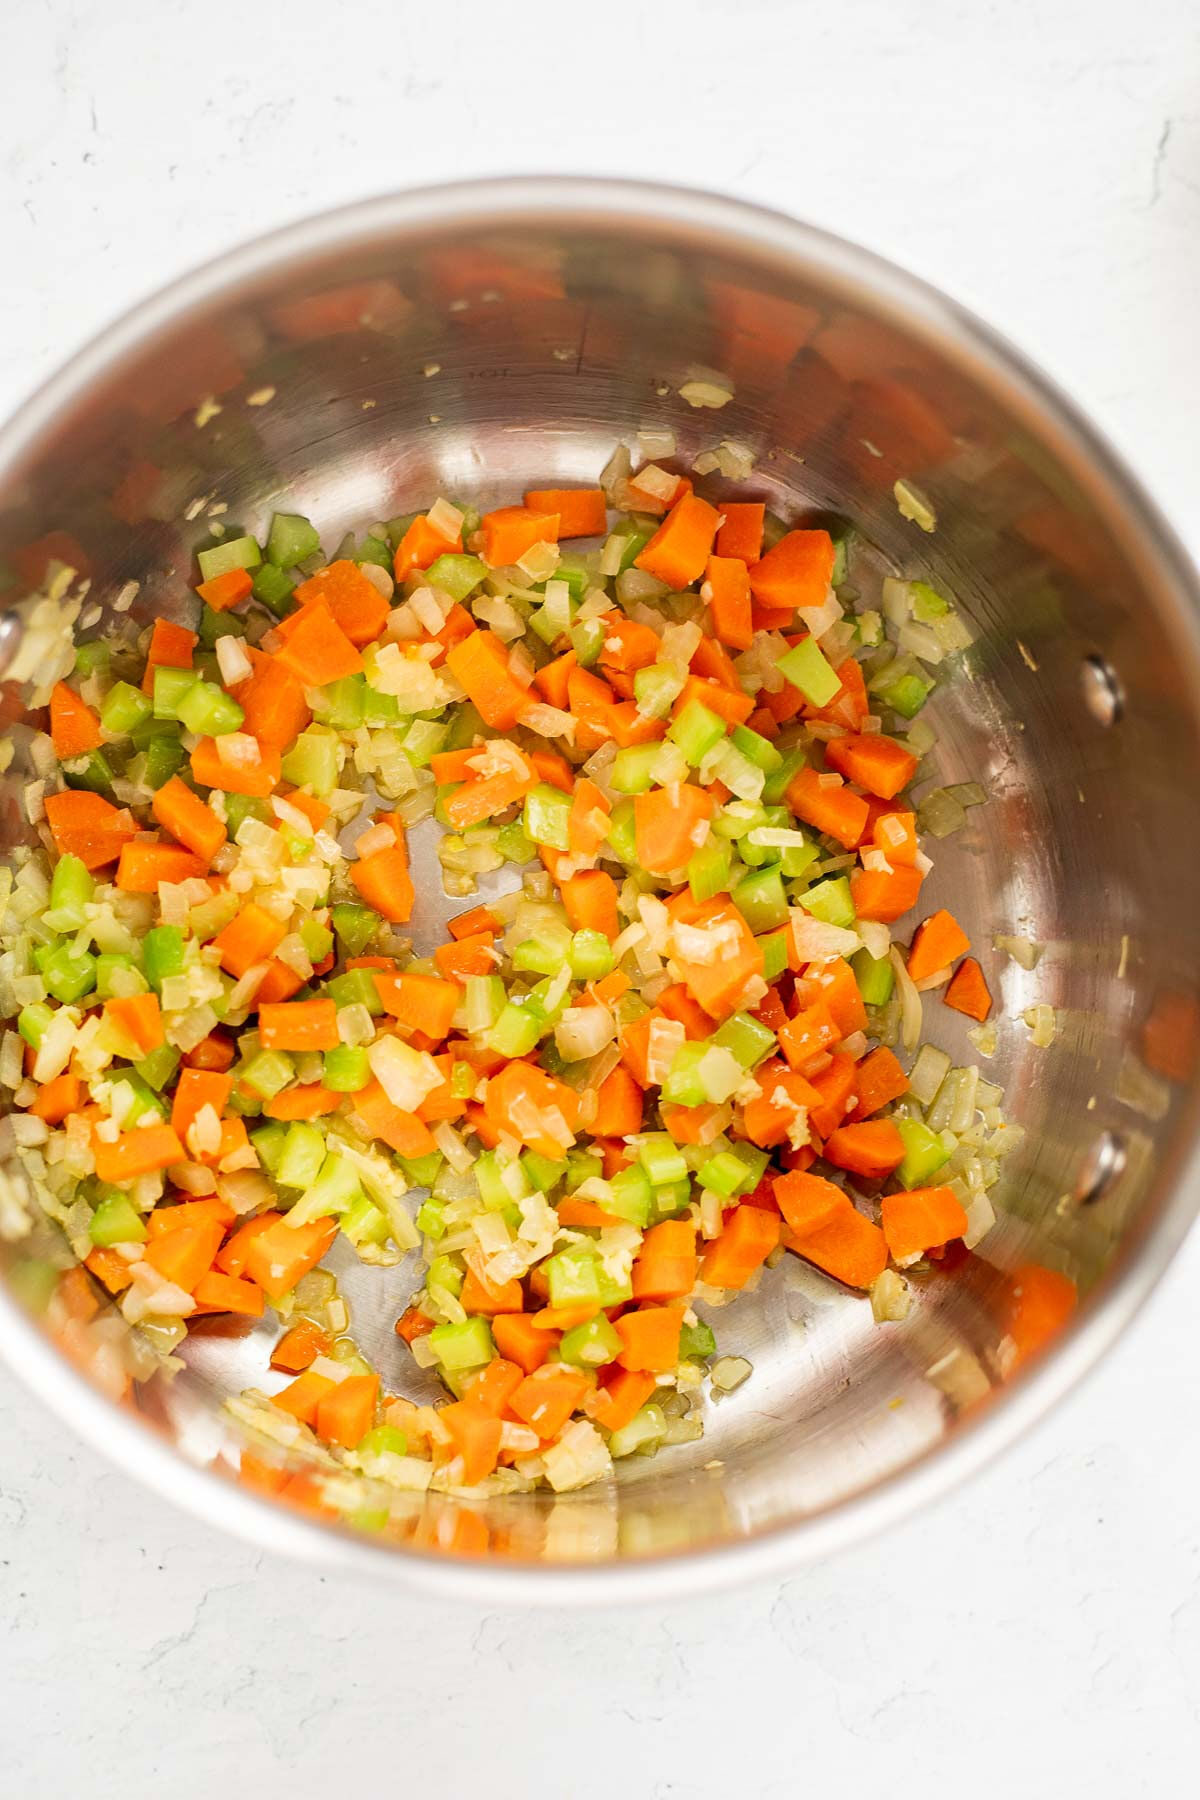 Carrots, onions, and celery in a stock pot.